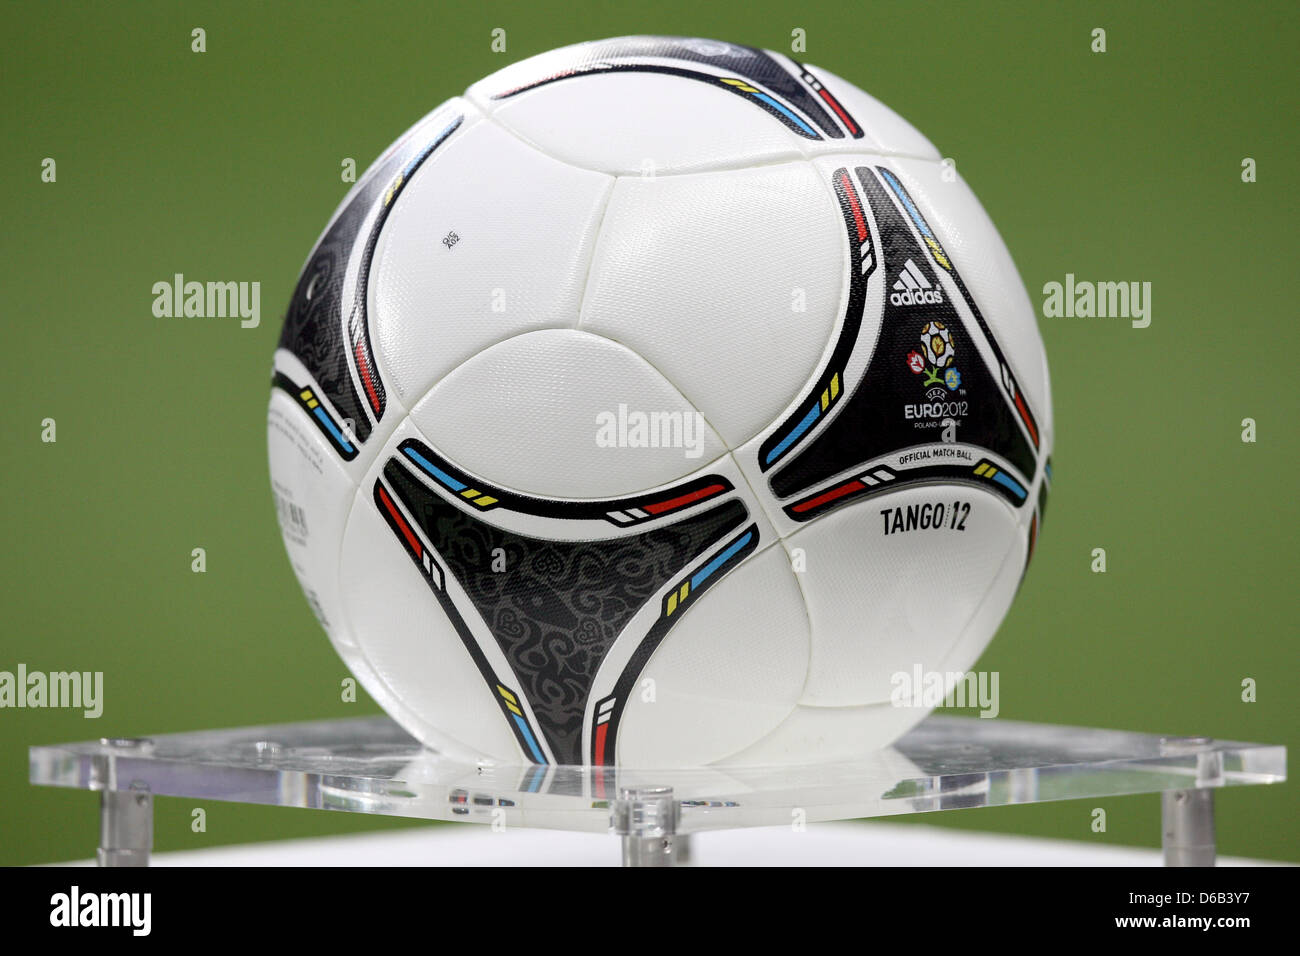 The soccer ball 'Tango 12' by adidas lies on a pedestal before the  international soccer match between Germany and Argentina at the  Commerzbank-Arena in Frankfurt Main, Germany, 15 August 2012. Photo: Fredrik